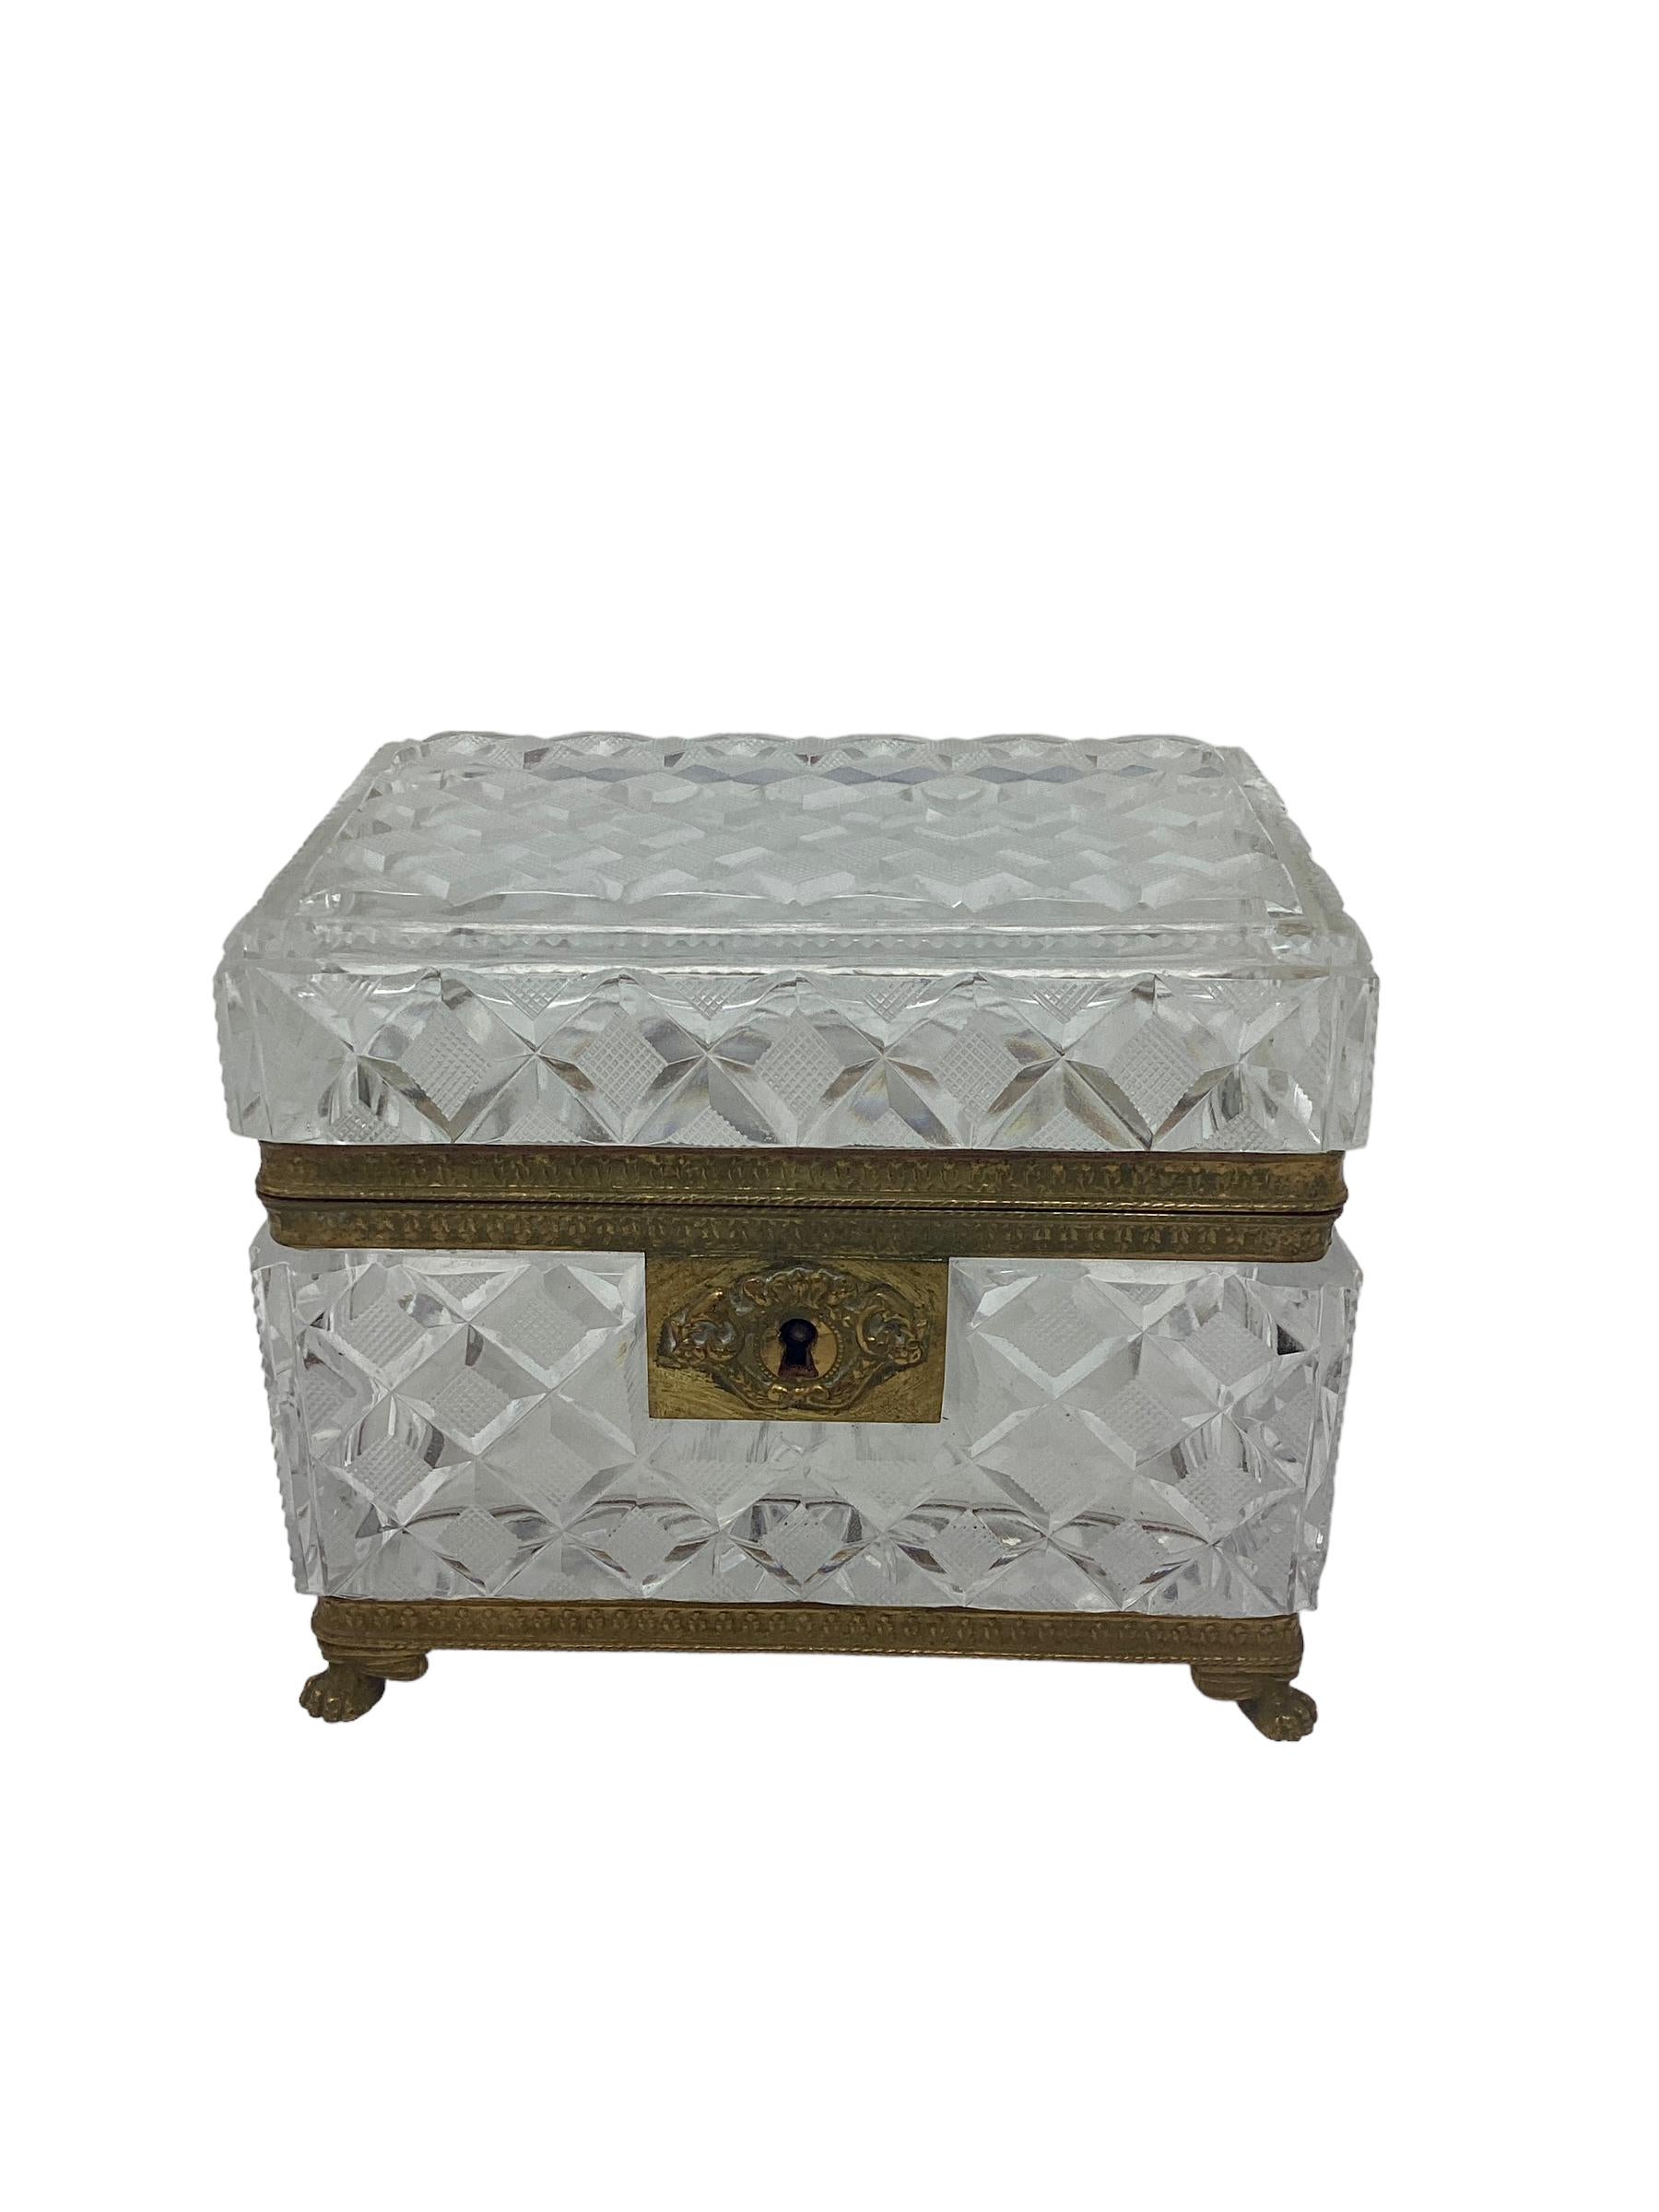 19th Century Baccarat Cut Crystal Box or Casket with Gilt Bronze Mounts  For Sale 4